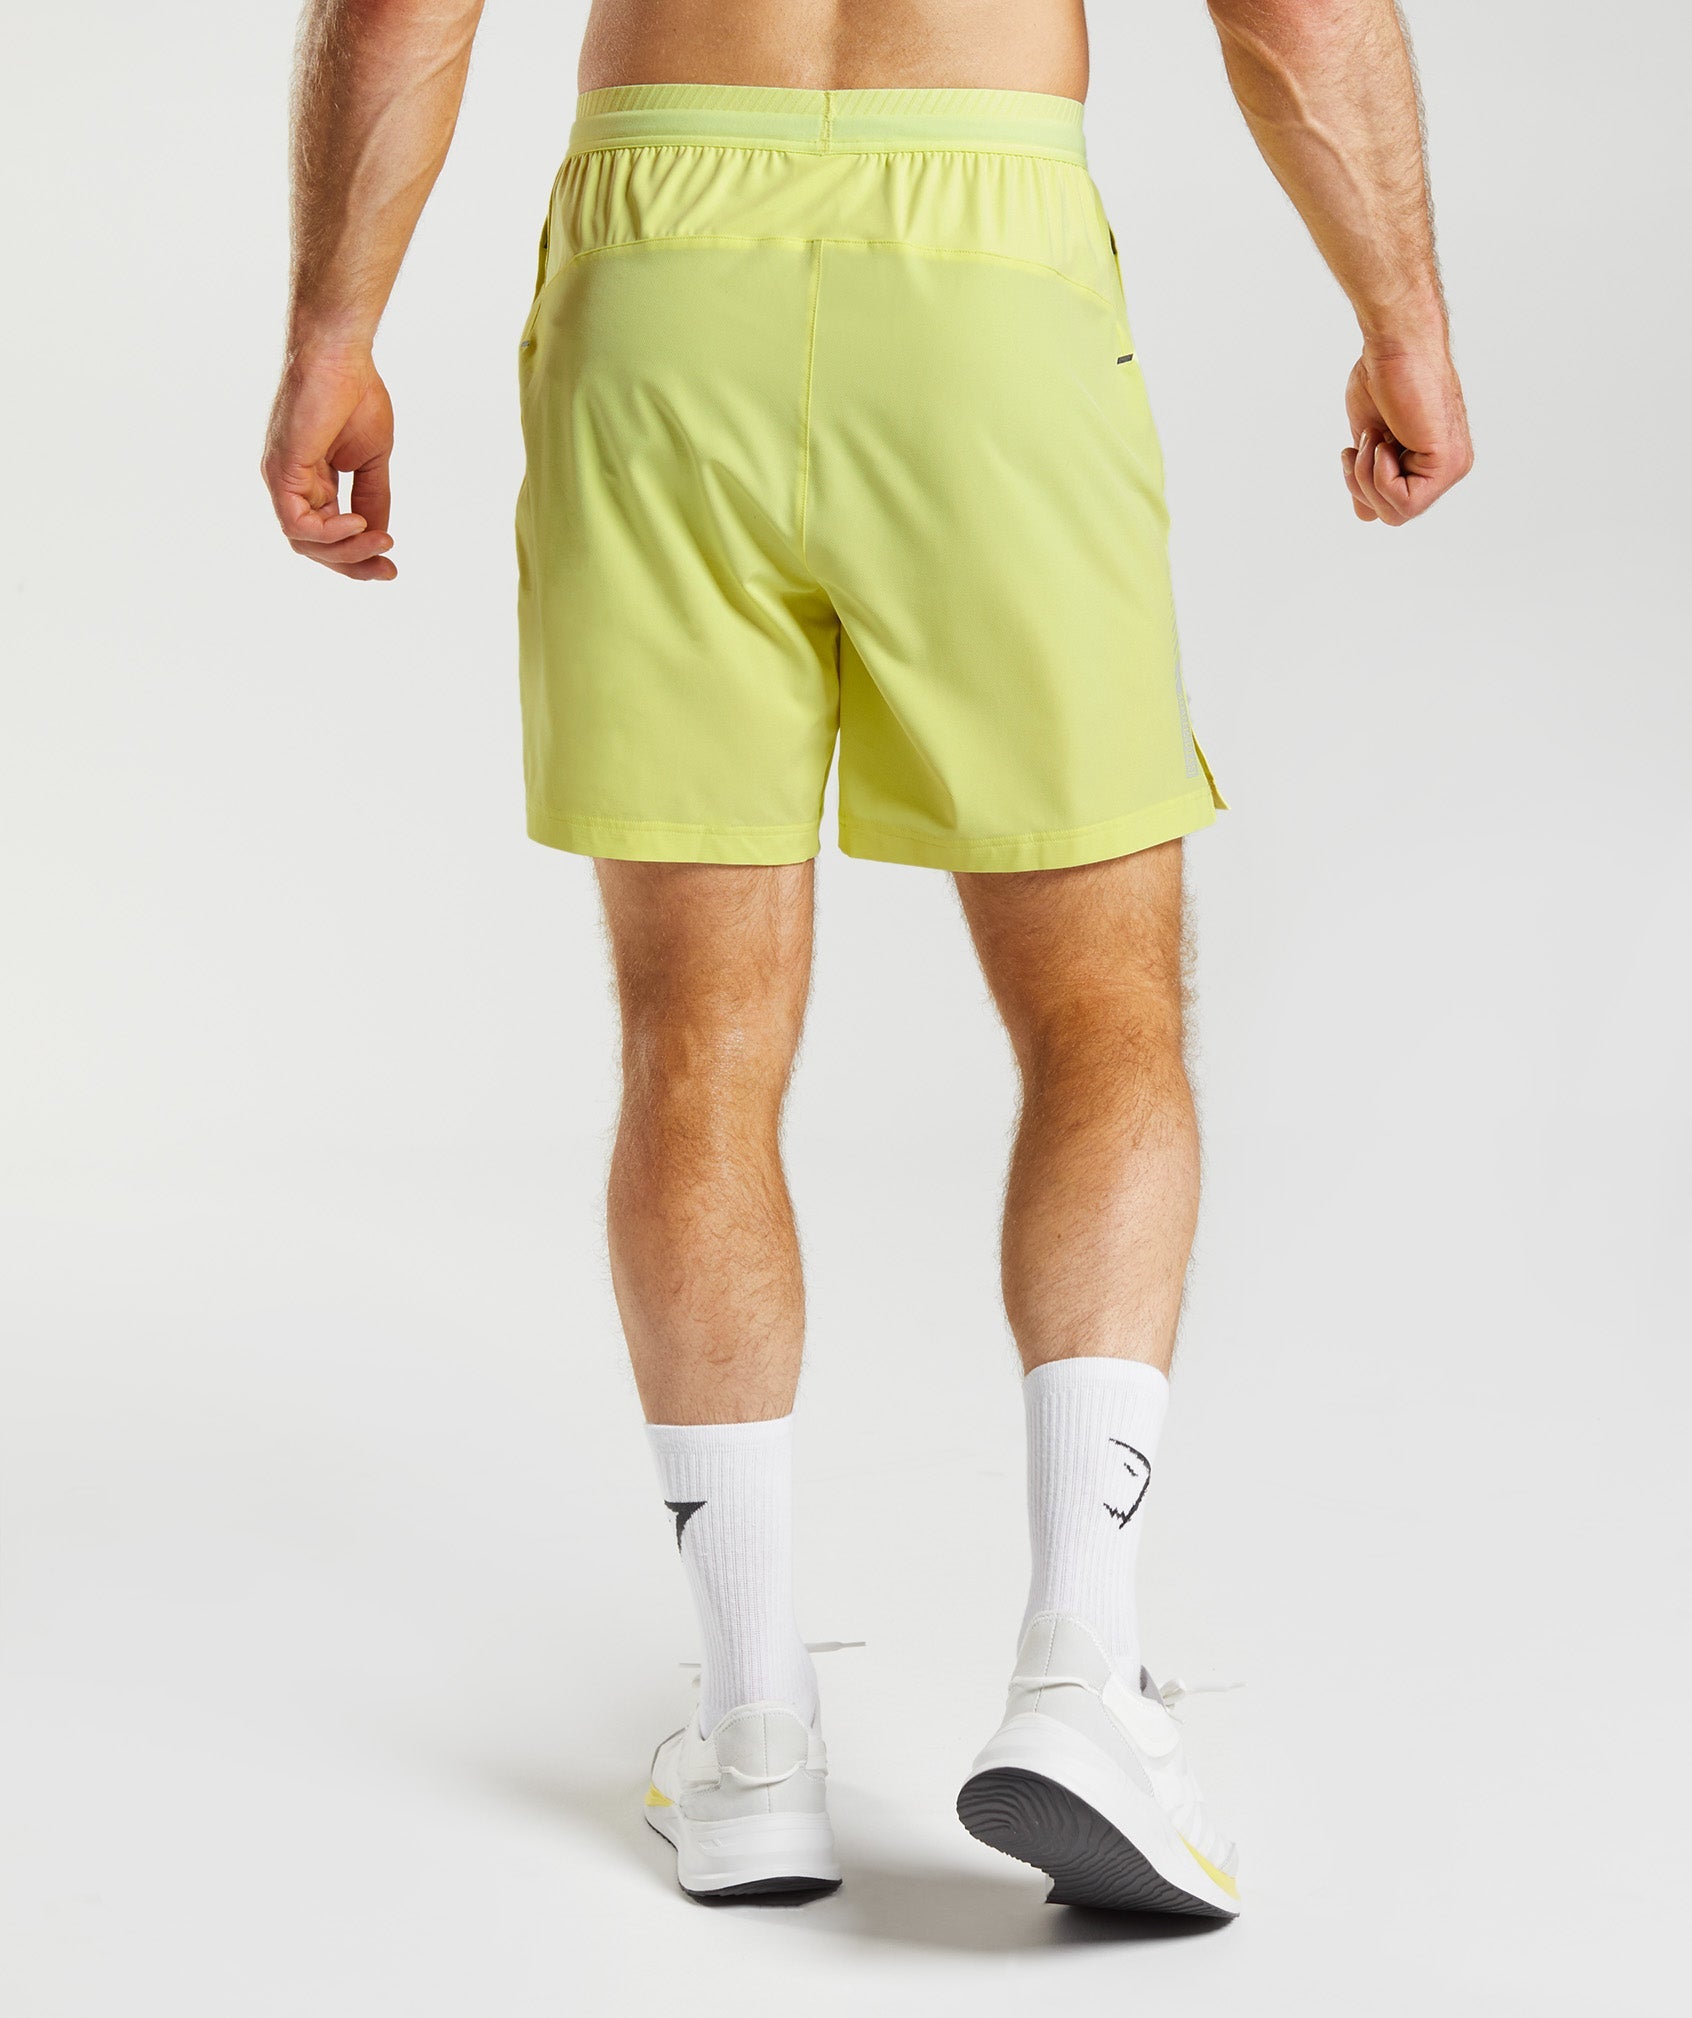 Apex 7" Hybrid Shorts in Firefly Green - view 2